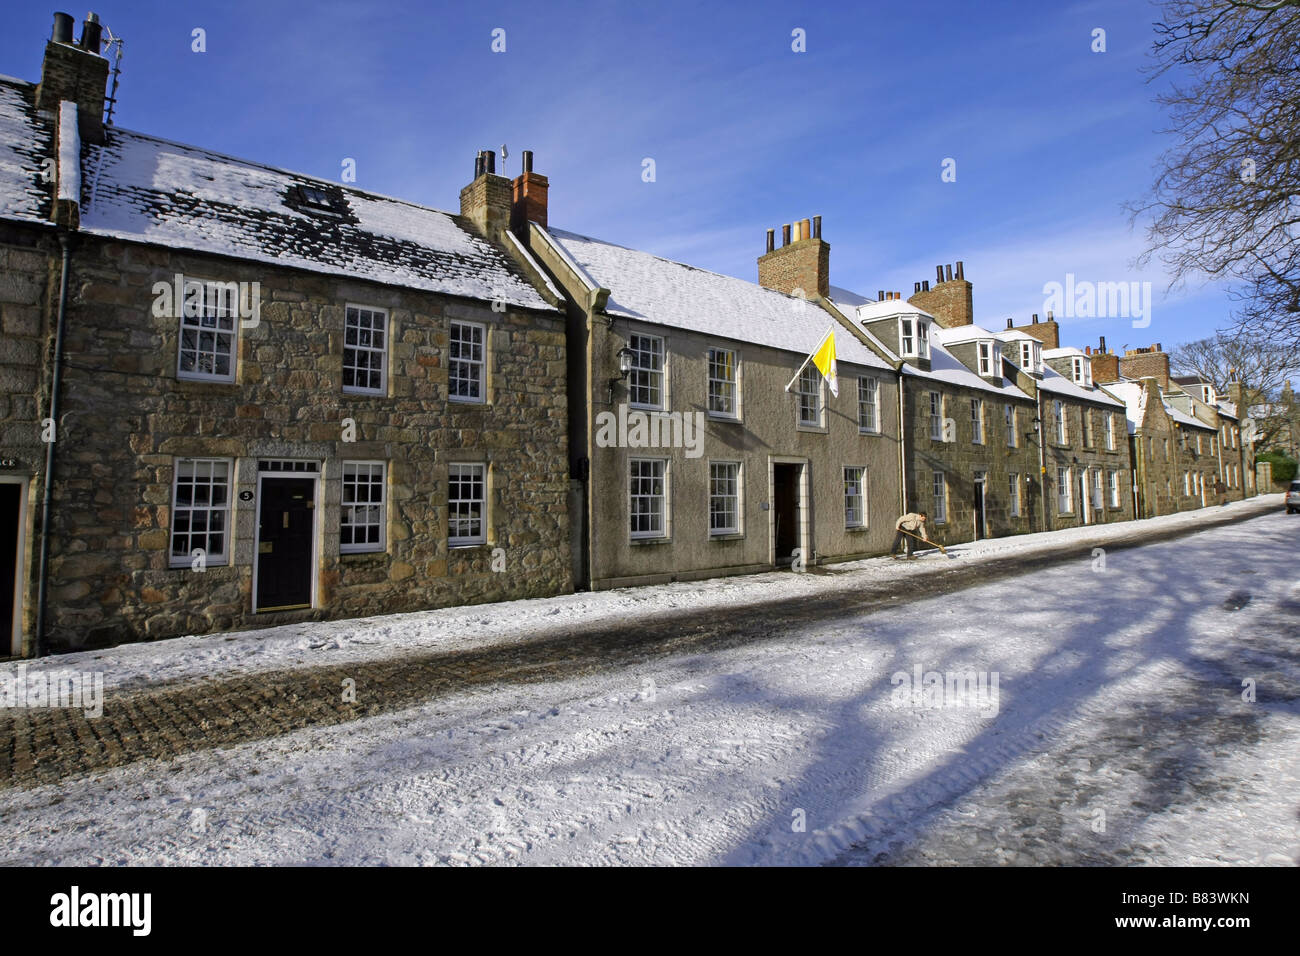 The houses in the High Street at the University in Old Aberdeen, Scotland, UK, covered in snow during winter Stock Photo